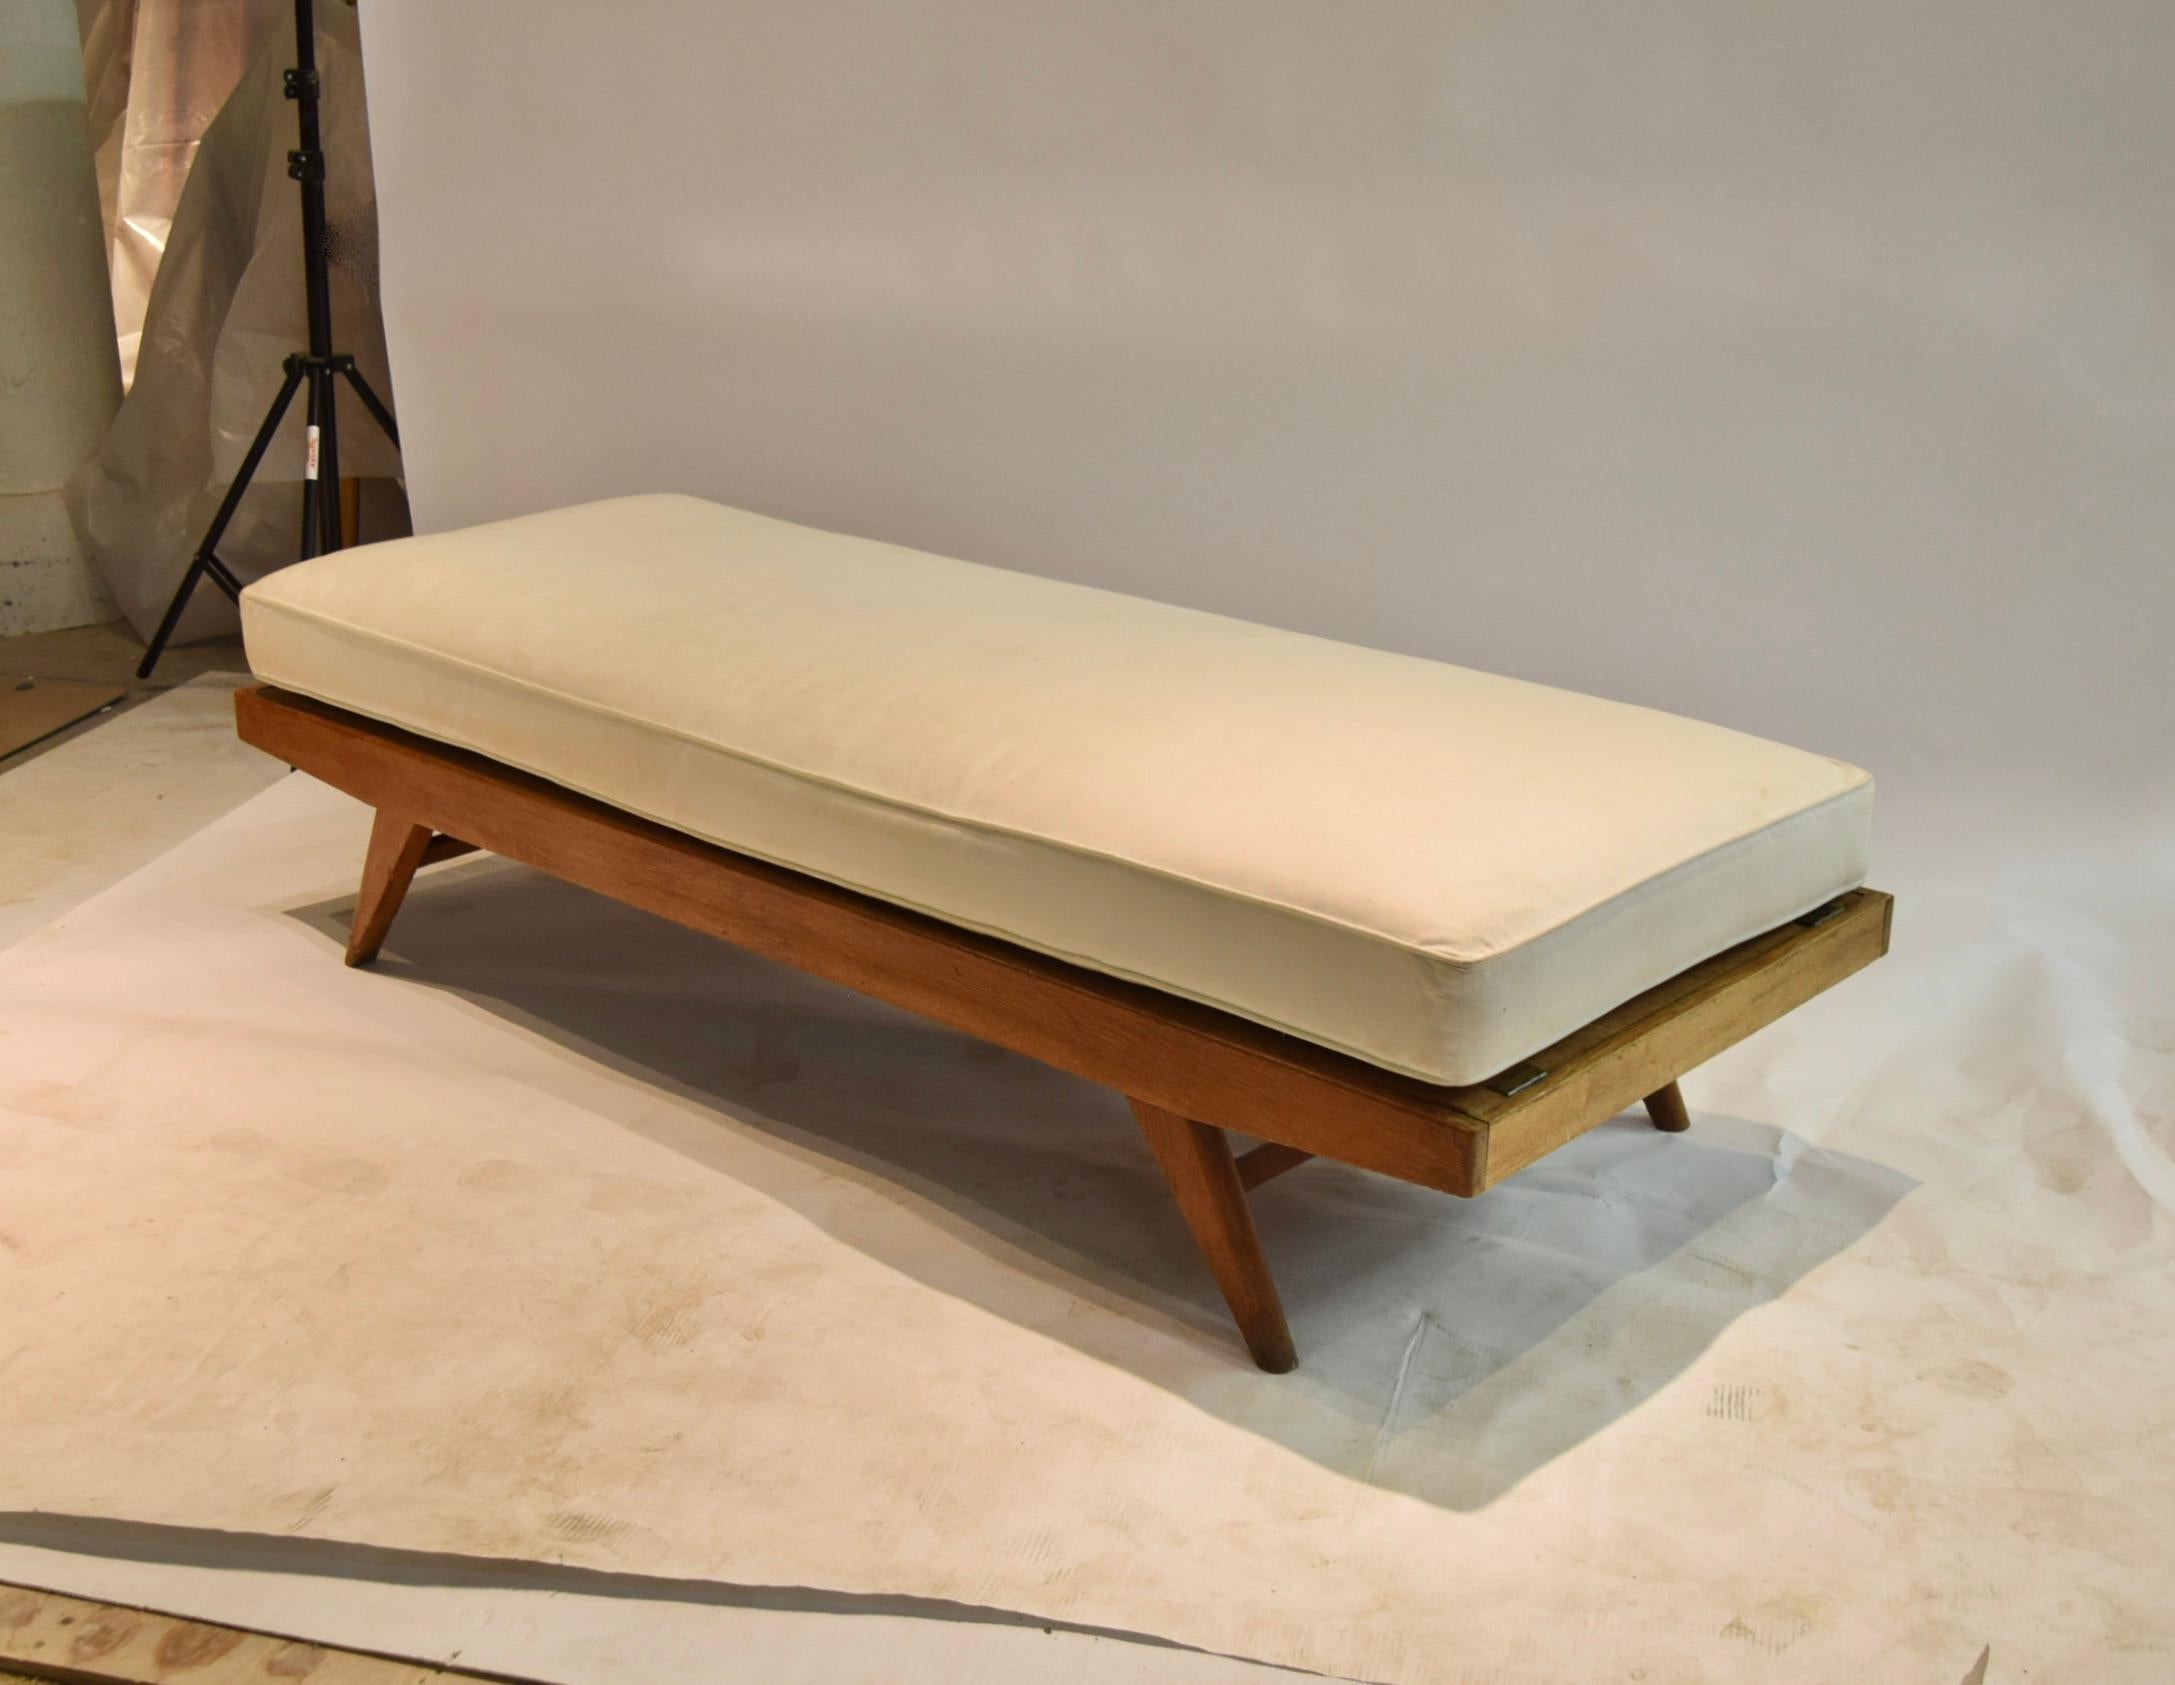 Daybed made by and labeled Free Span made of oakwood with four angled tampered legs, a stretcher at each end, a metal spring support frame located below the flat wooden platform, and a custom cushion upholstered in muslin. 
Listed seat height